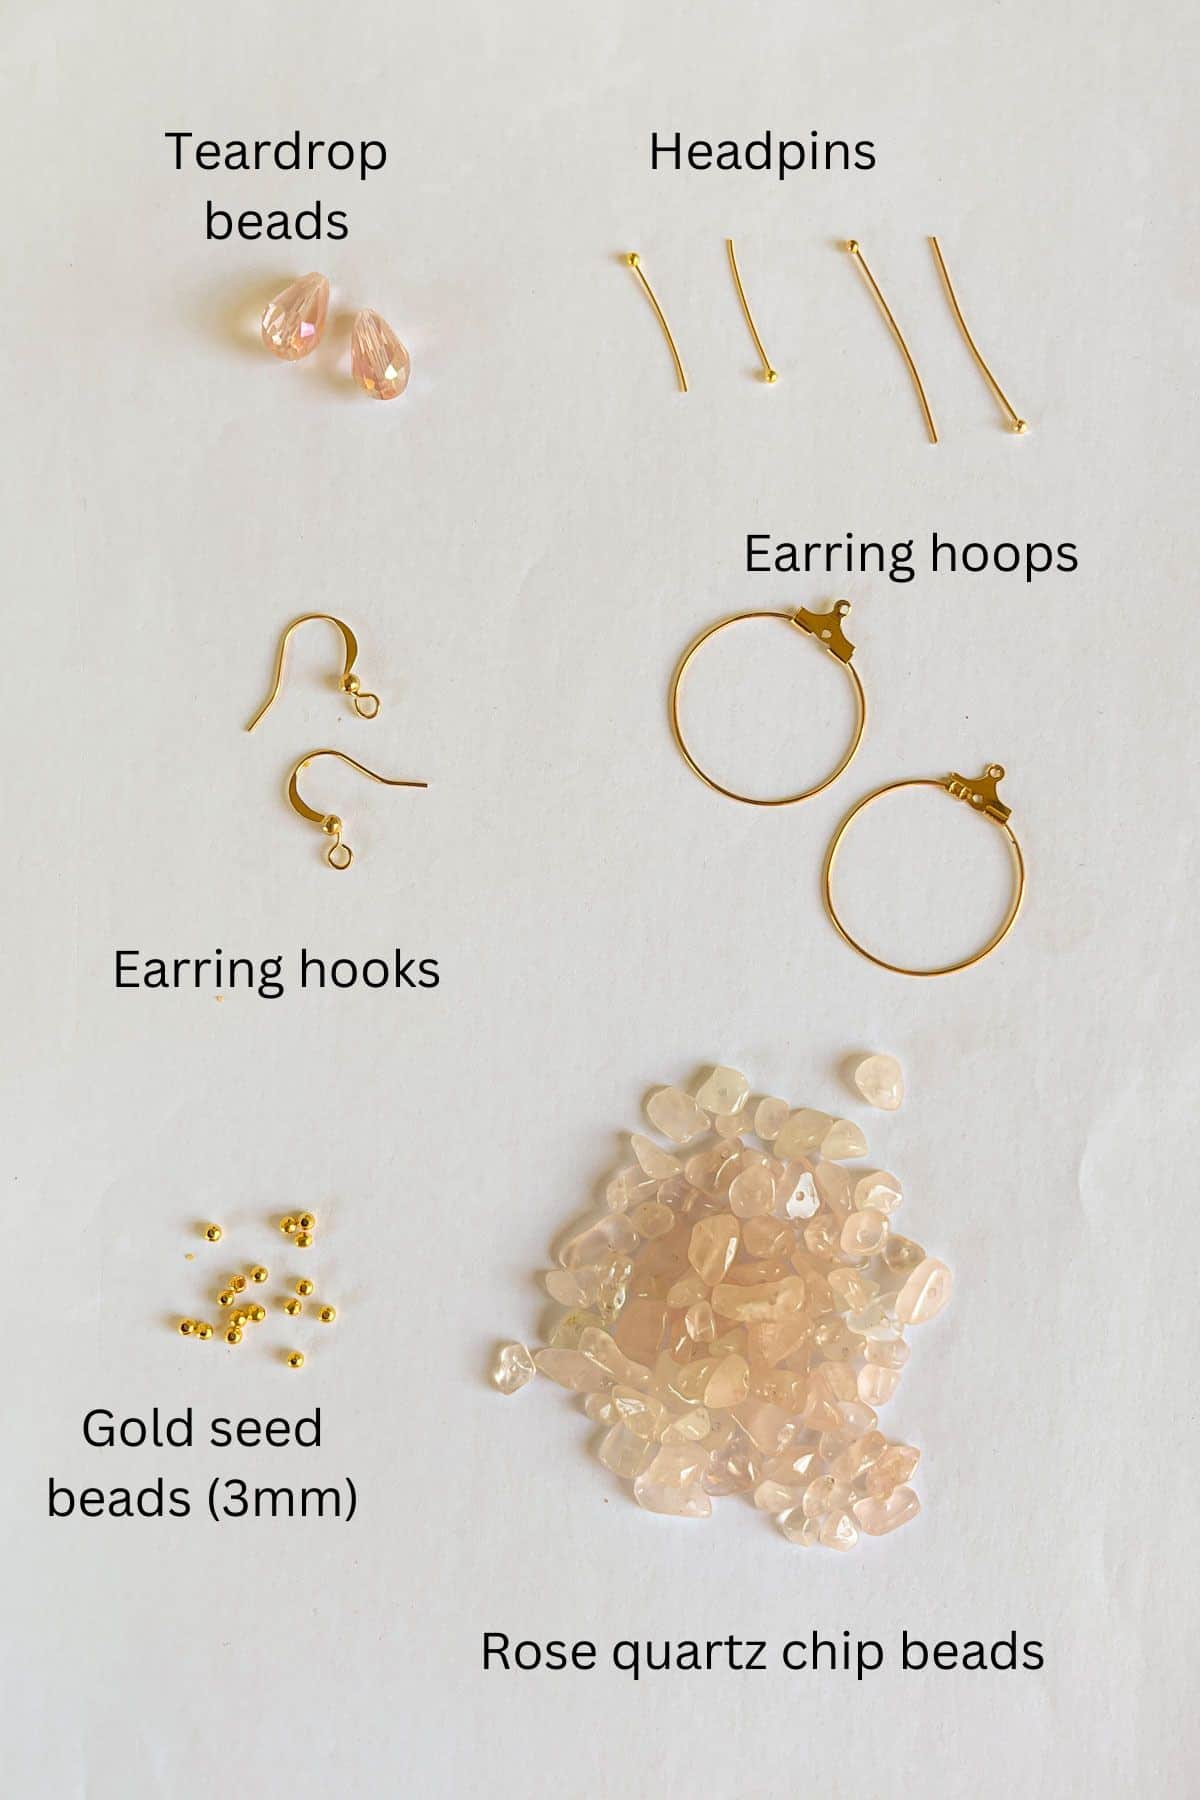 Teardrop beads, rose quartz chip beads, earring hooks, earring hoops, headpins and gold seed beads against a white background.